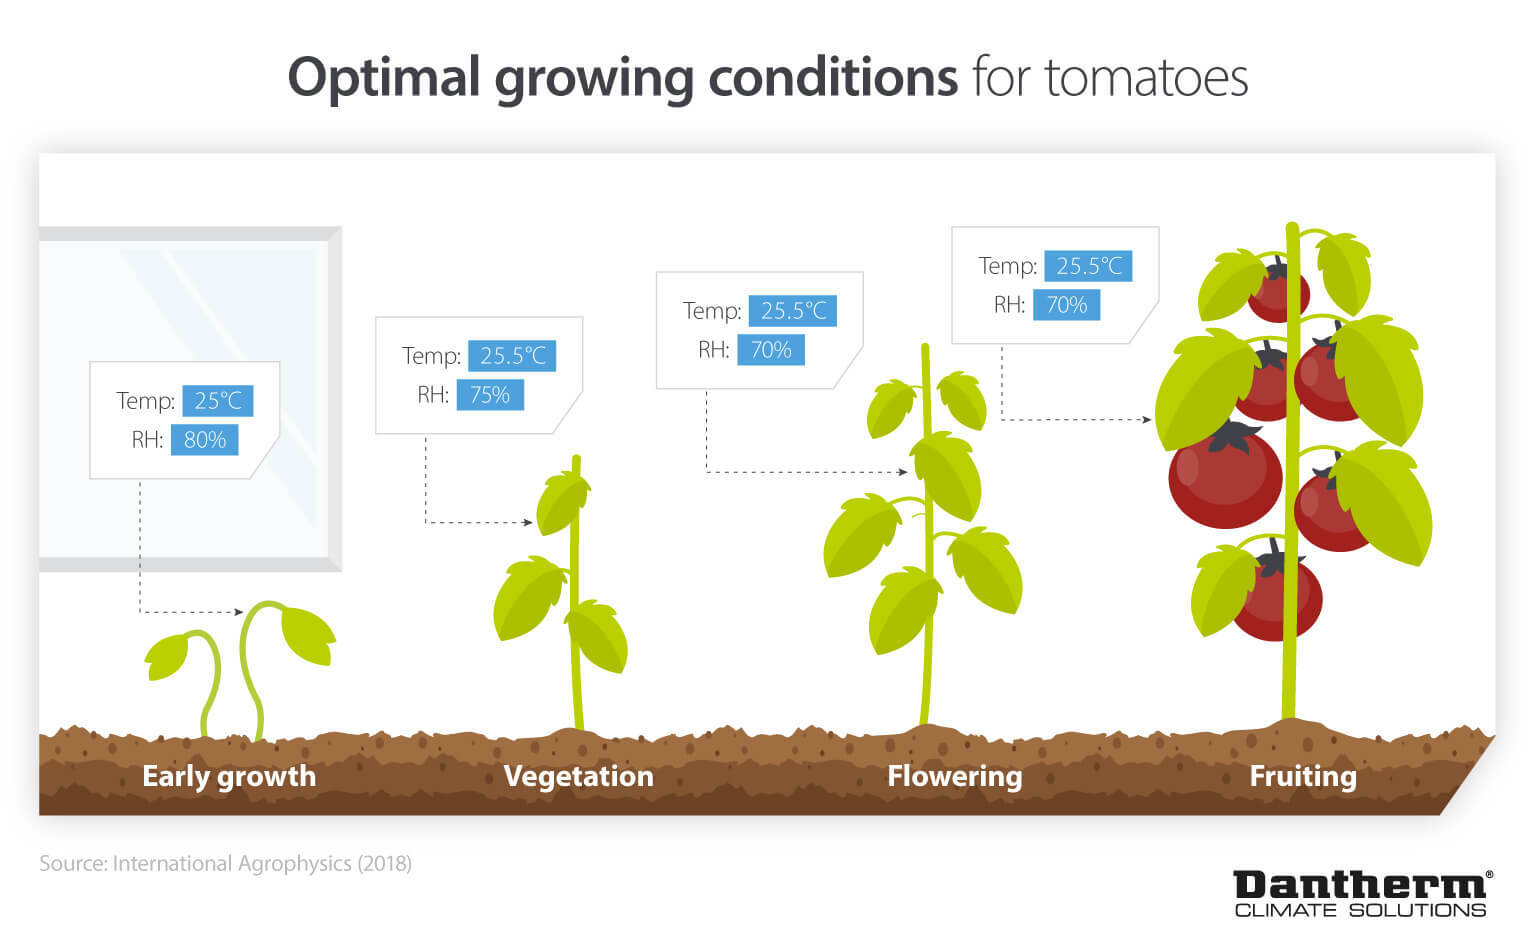 How vertical farms can maintain optimal growing conditions using less energy and resources - infographic image